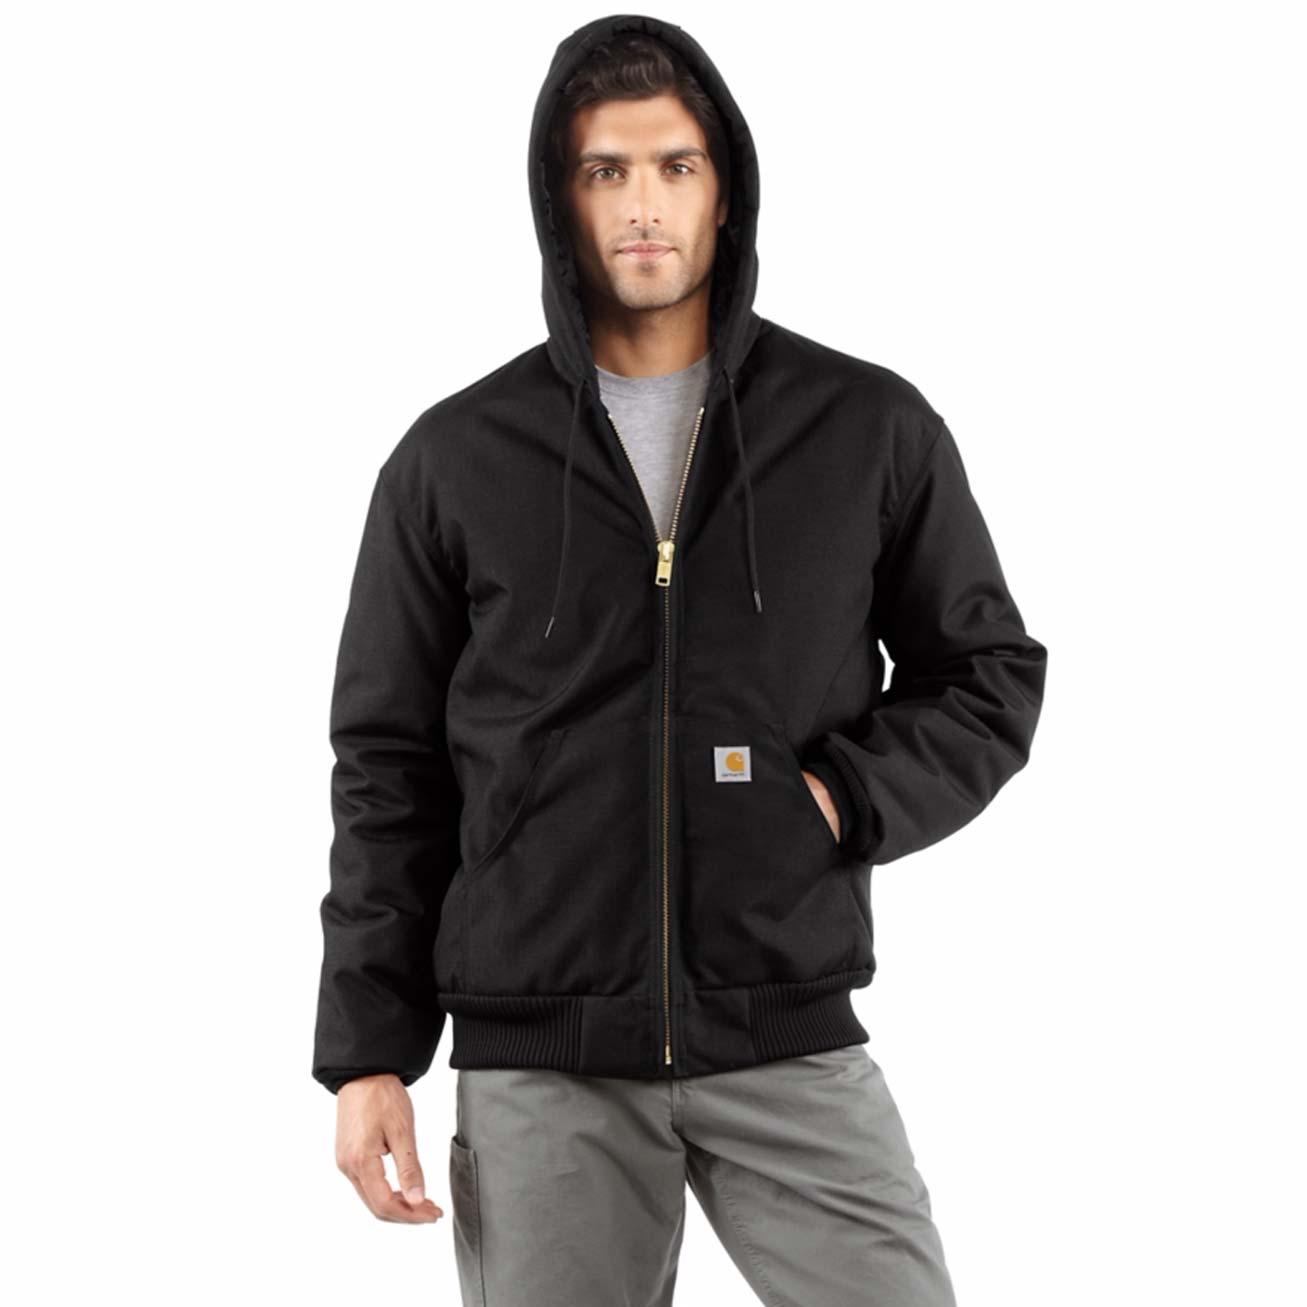 Carhartt Extremes Arctic-Quilt-Lined Active Jacket, #J133BLK